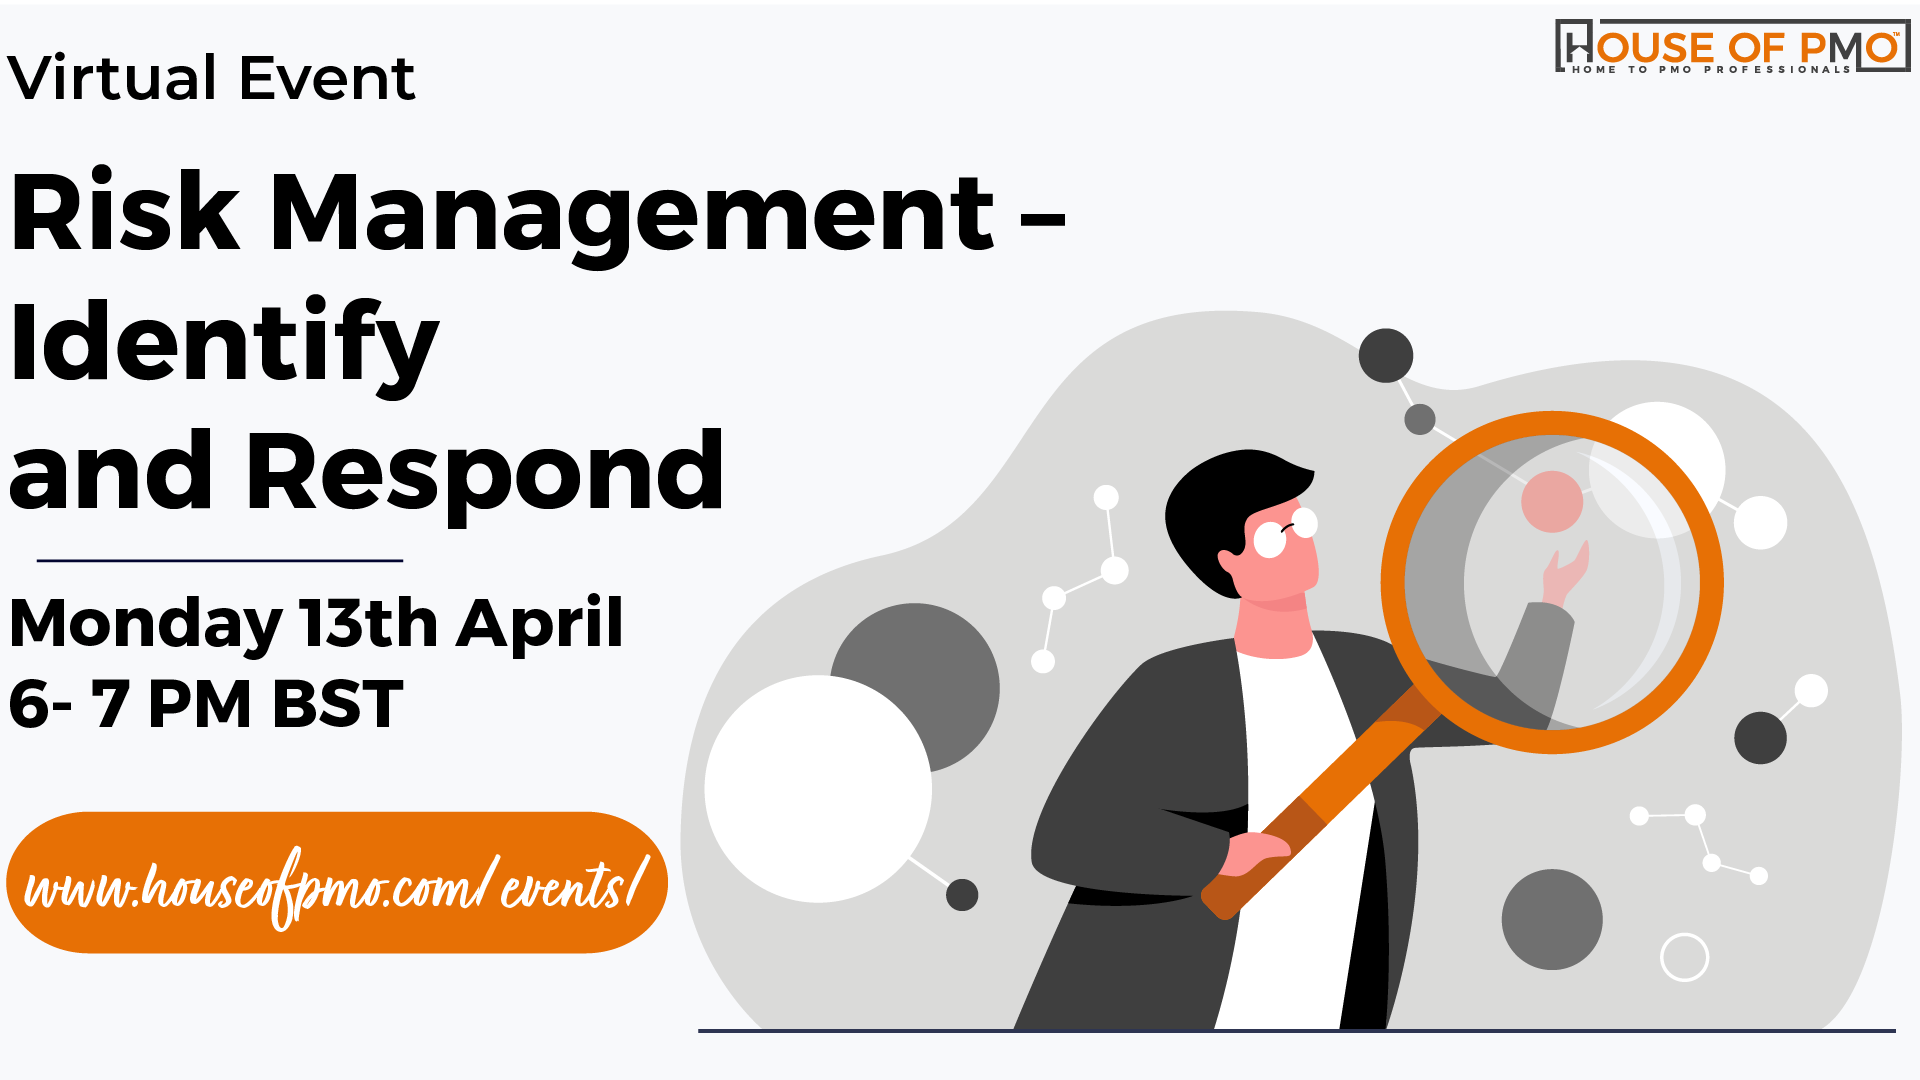 Image for the event risk management- identify and respond. It shows a cartoon man holding a magnifying glass